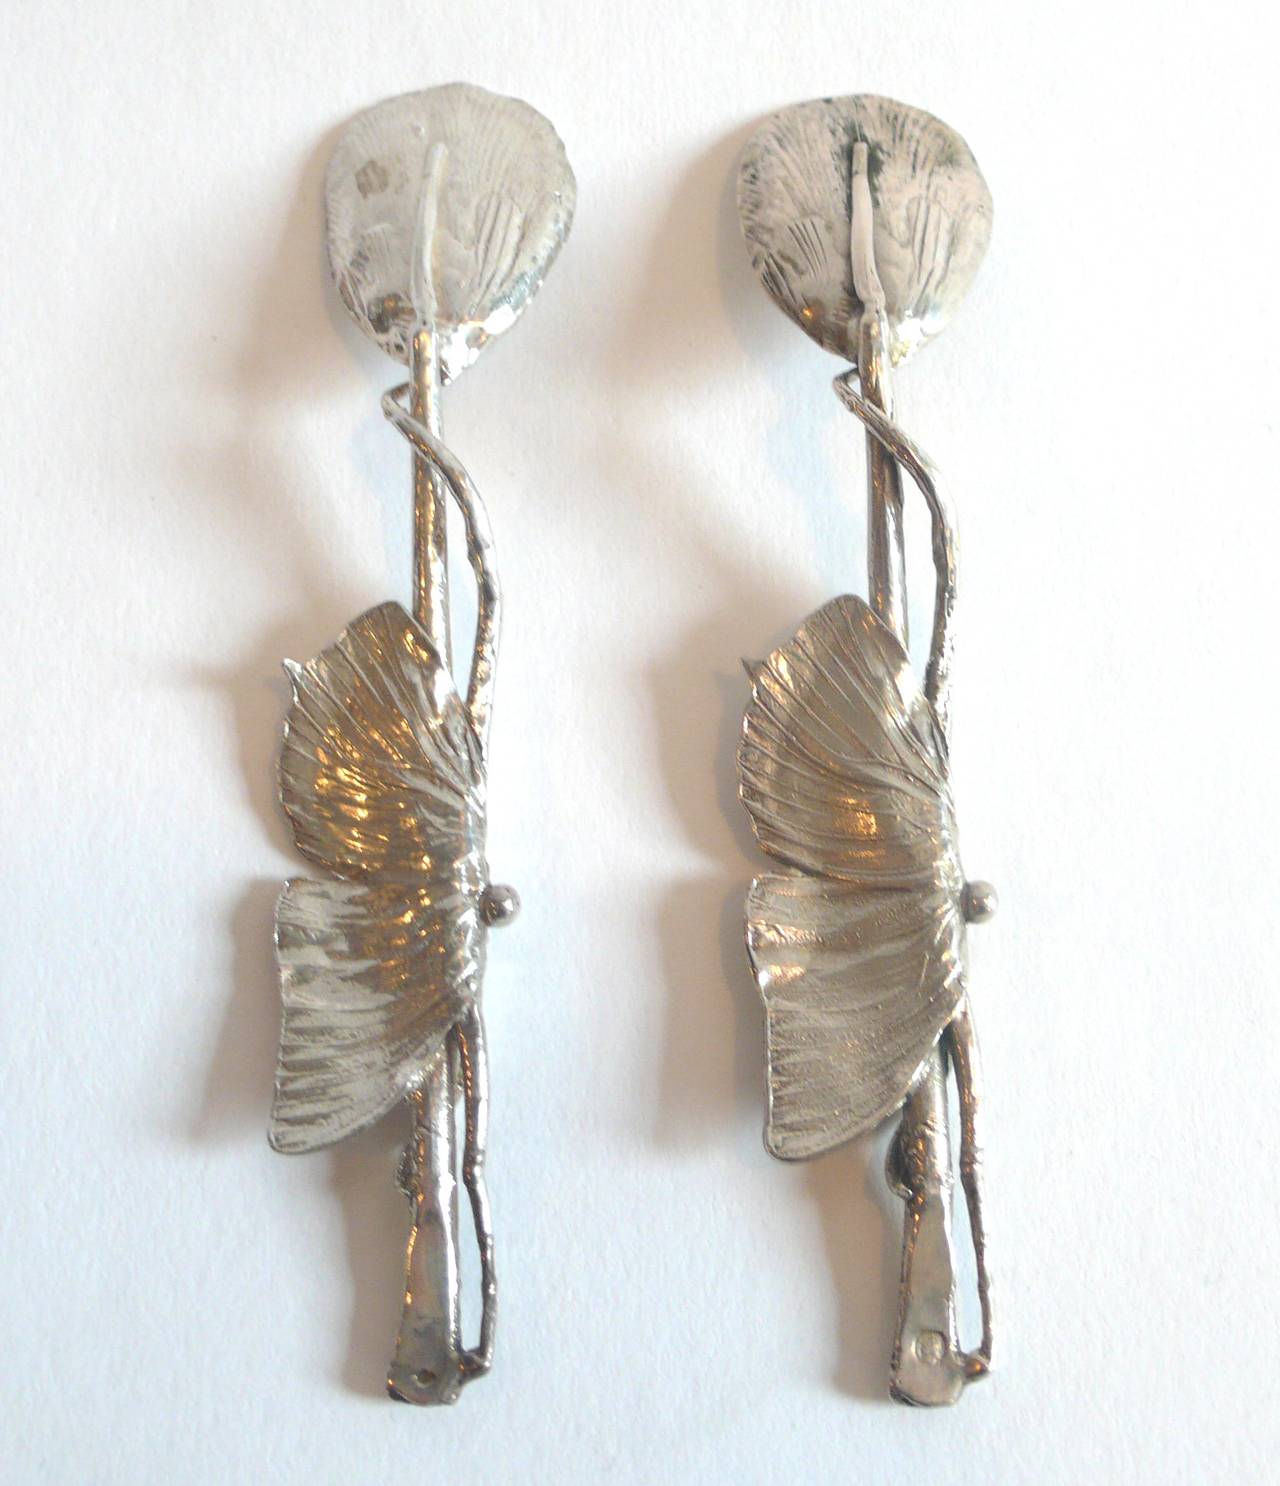 Pair of Claude Lalanne sterling silver spoons with butterfly motif. Part of flatware service designed for Alexander Iolas, circa 1966.